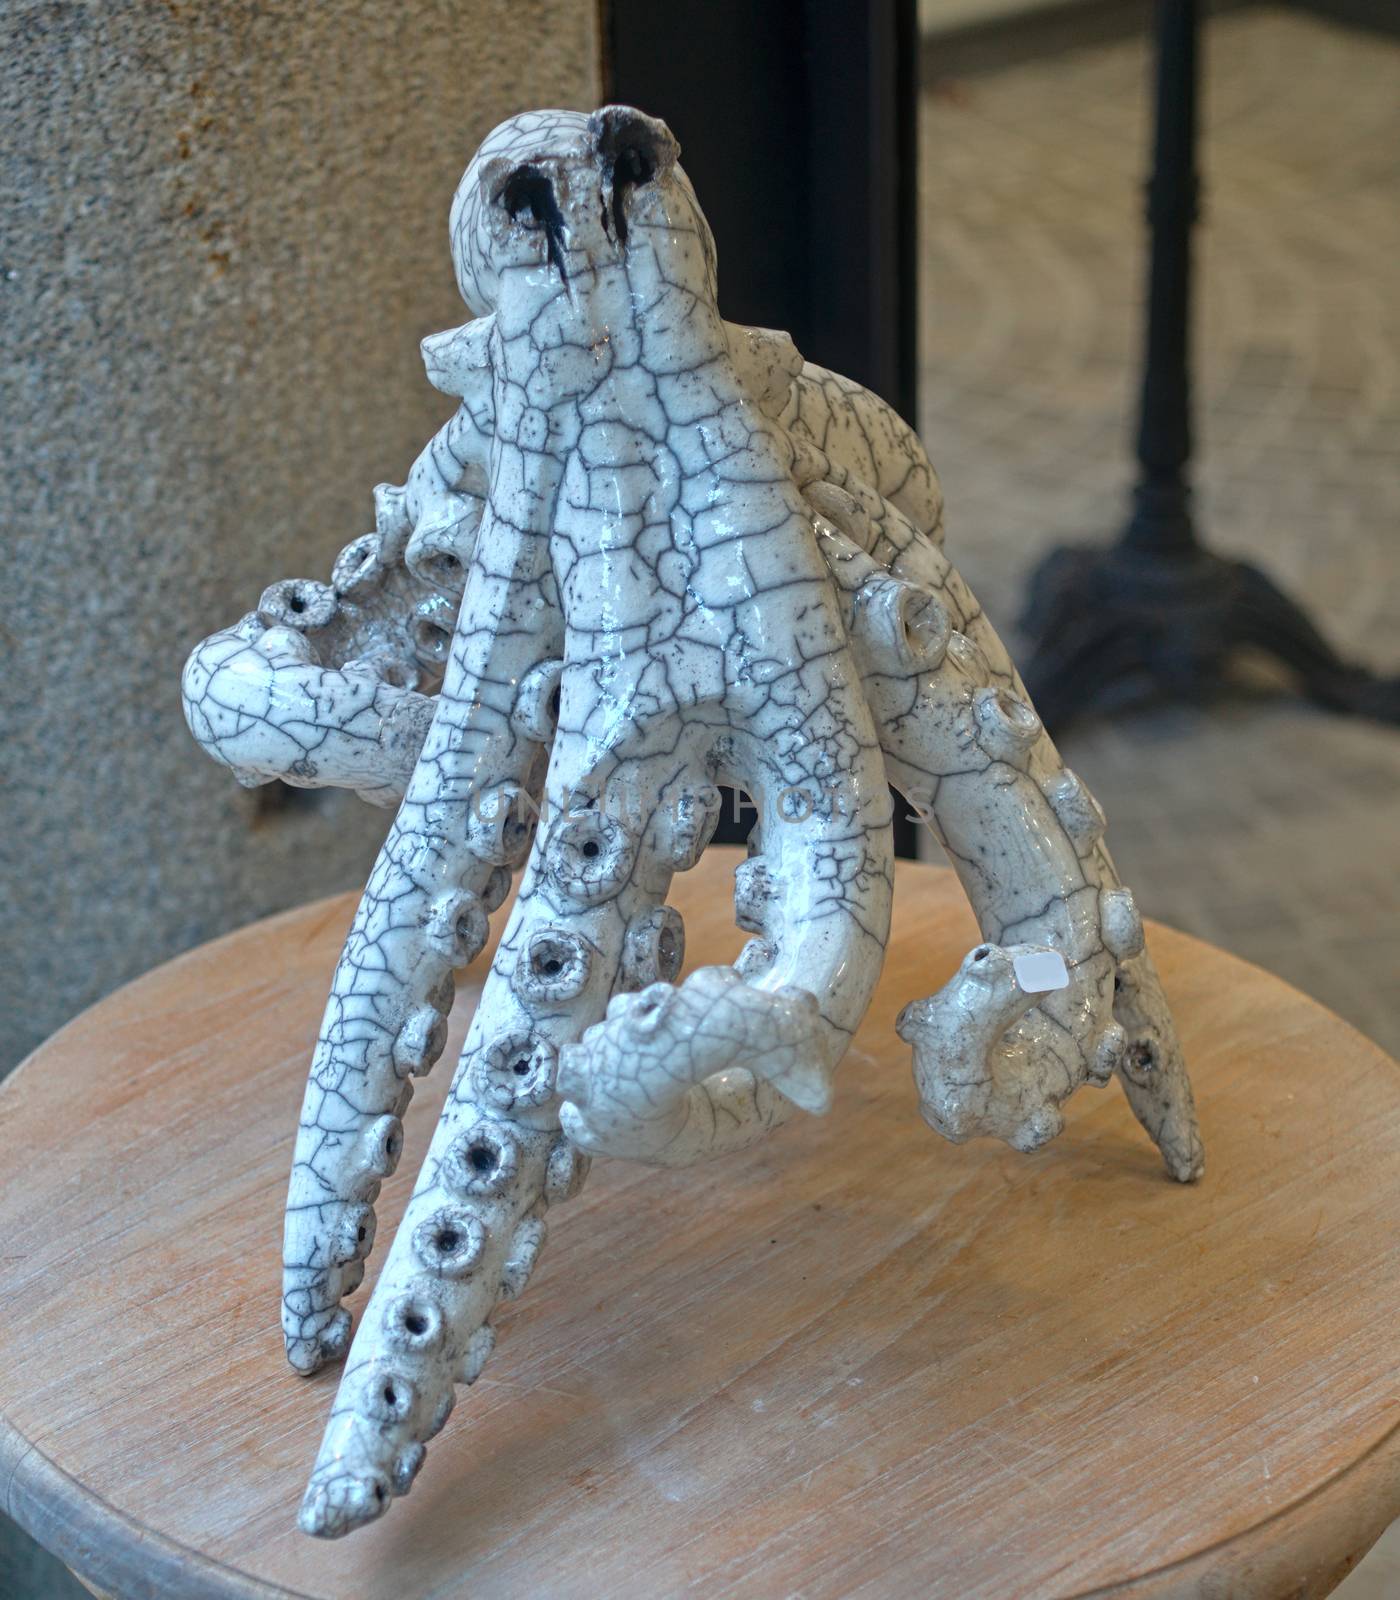 Ceramic figure of octopus on wooden table by sheriffkule